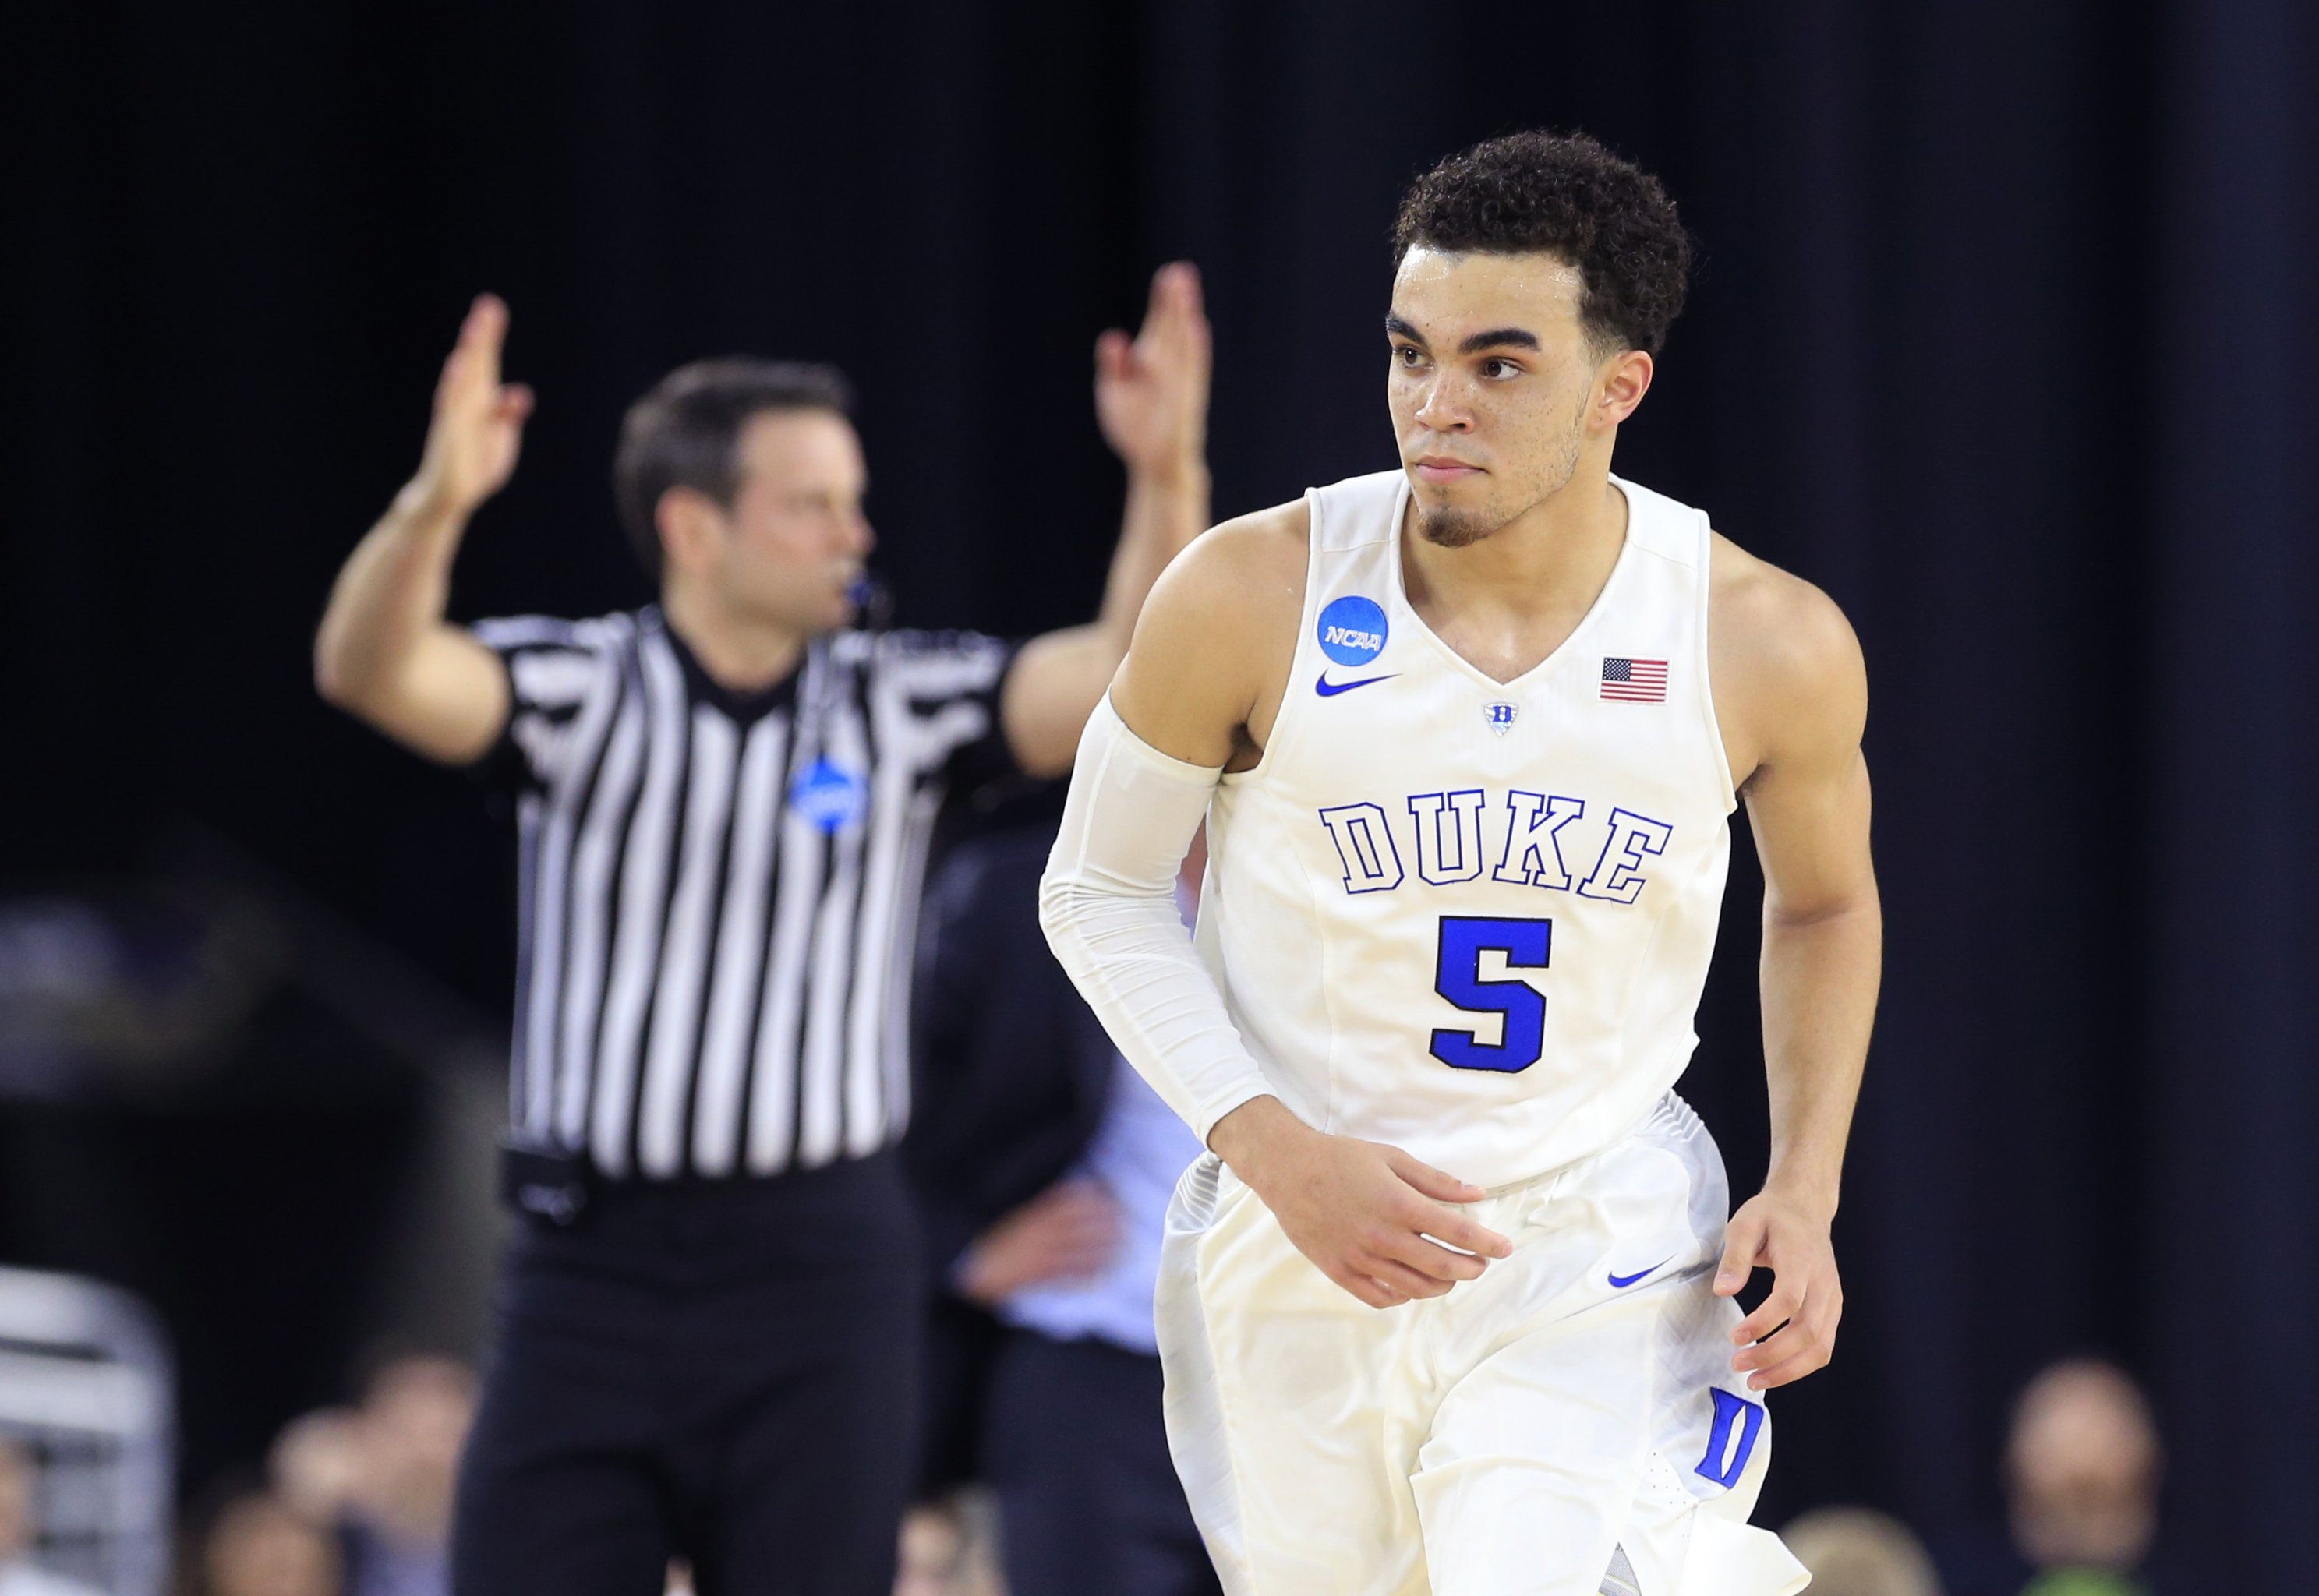 Duke's Tyus Jones Was Born to Play in the Final Four